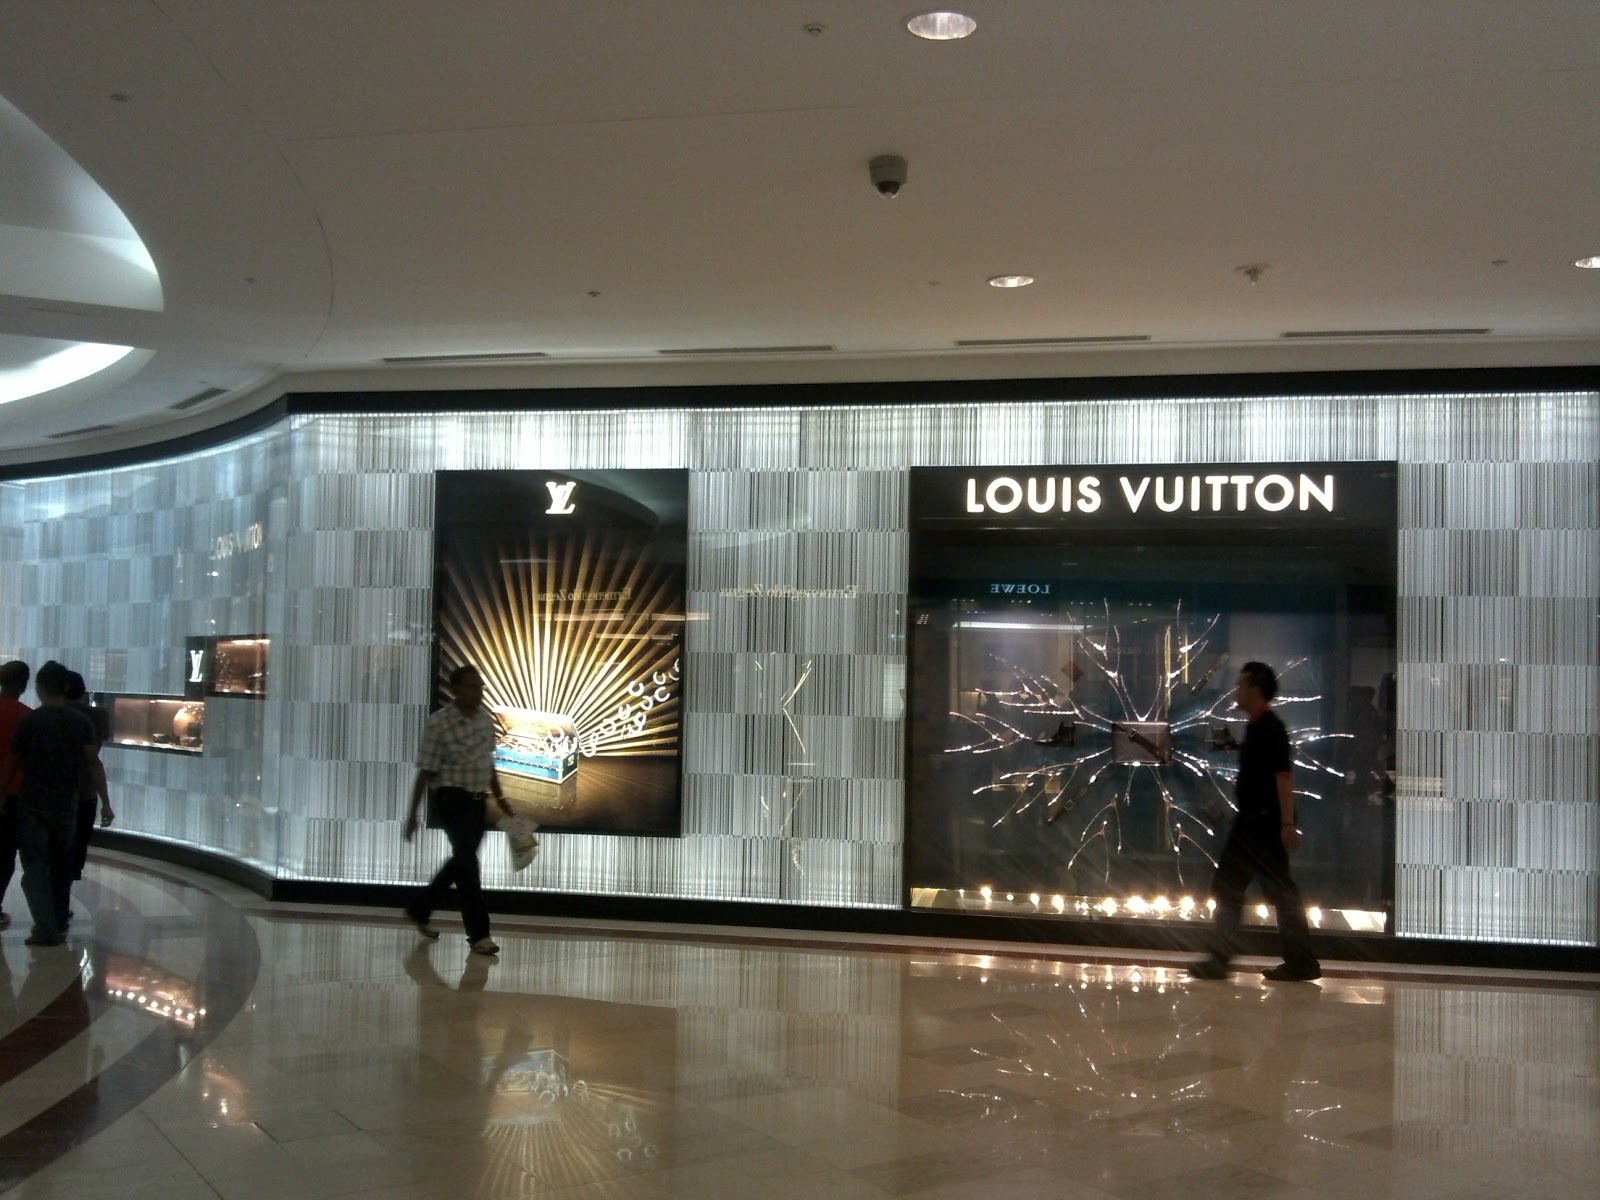 displayhunter2: Louis Vuitton: The walls could talk